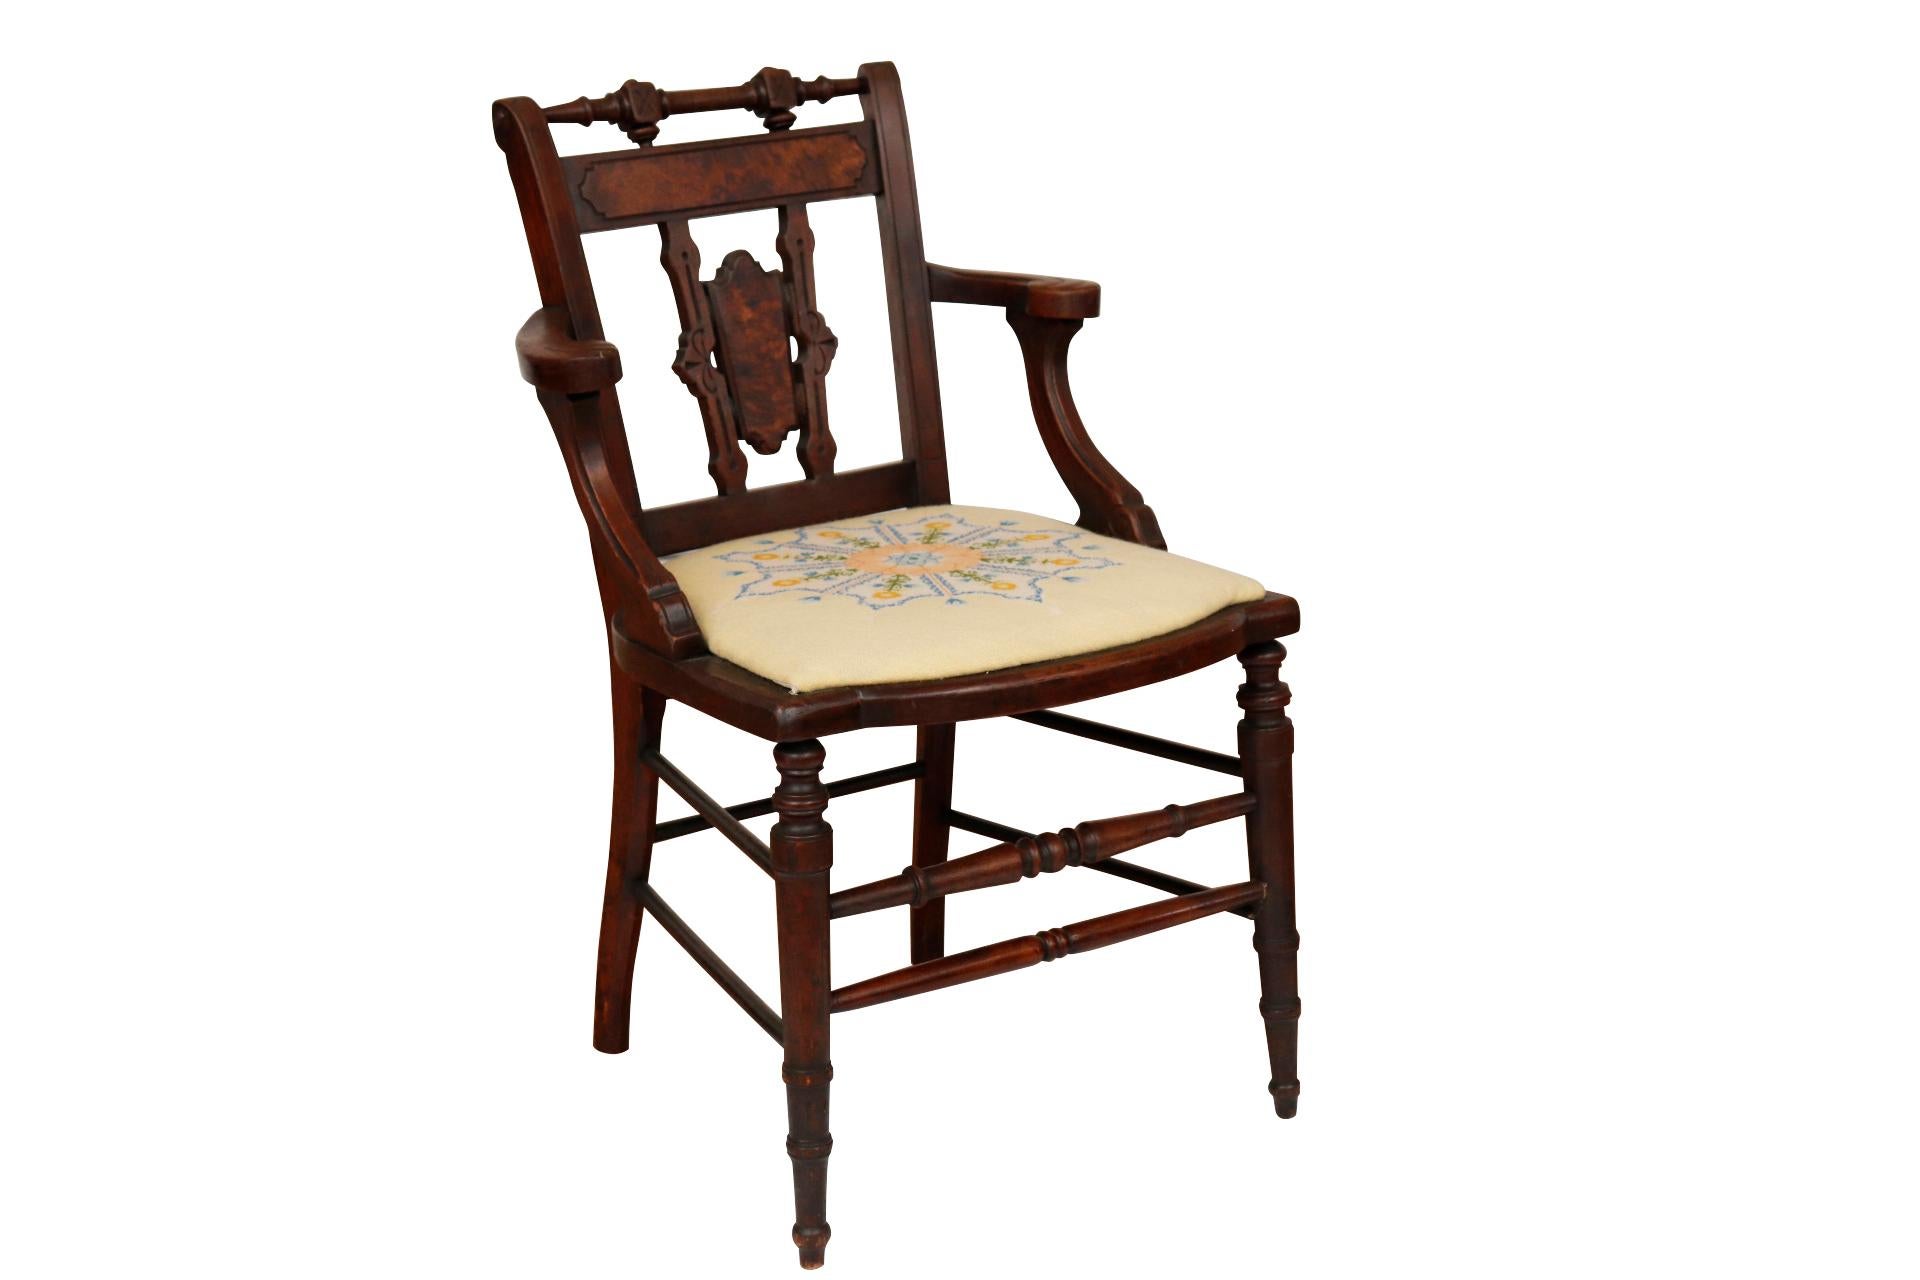 An antique Eastlake side chair. The shield shaped seat is upholstered with a floral needlepoint. Square x carved finials top the crest rail, above a horizontal splat decorated with a burlwood cartouche. The back splat is made with two supports